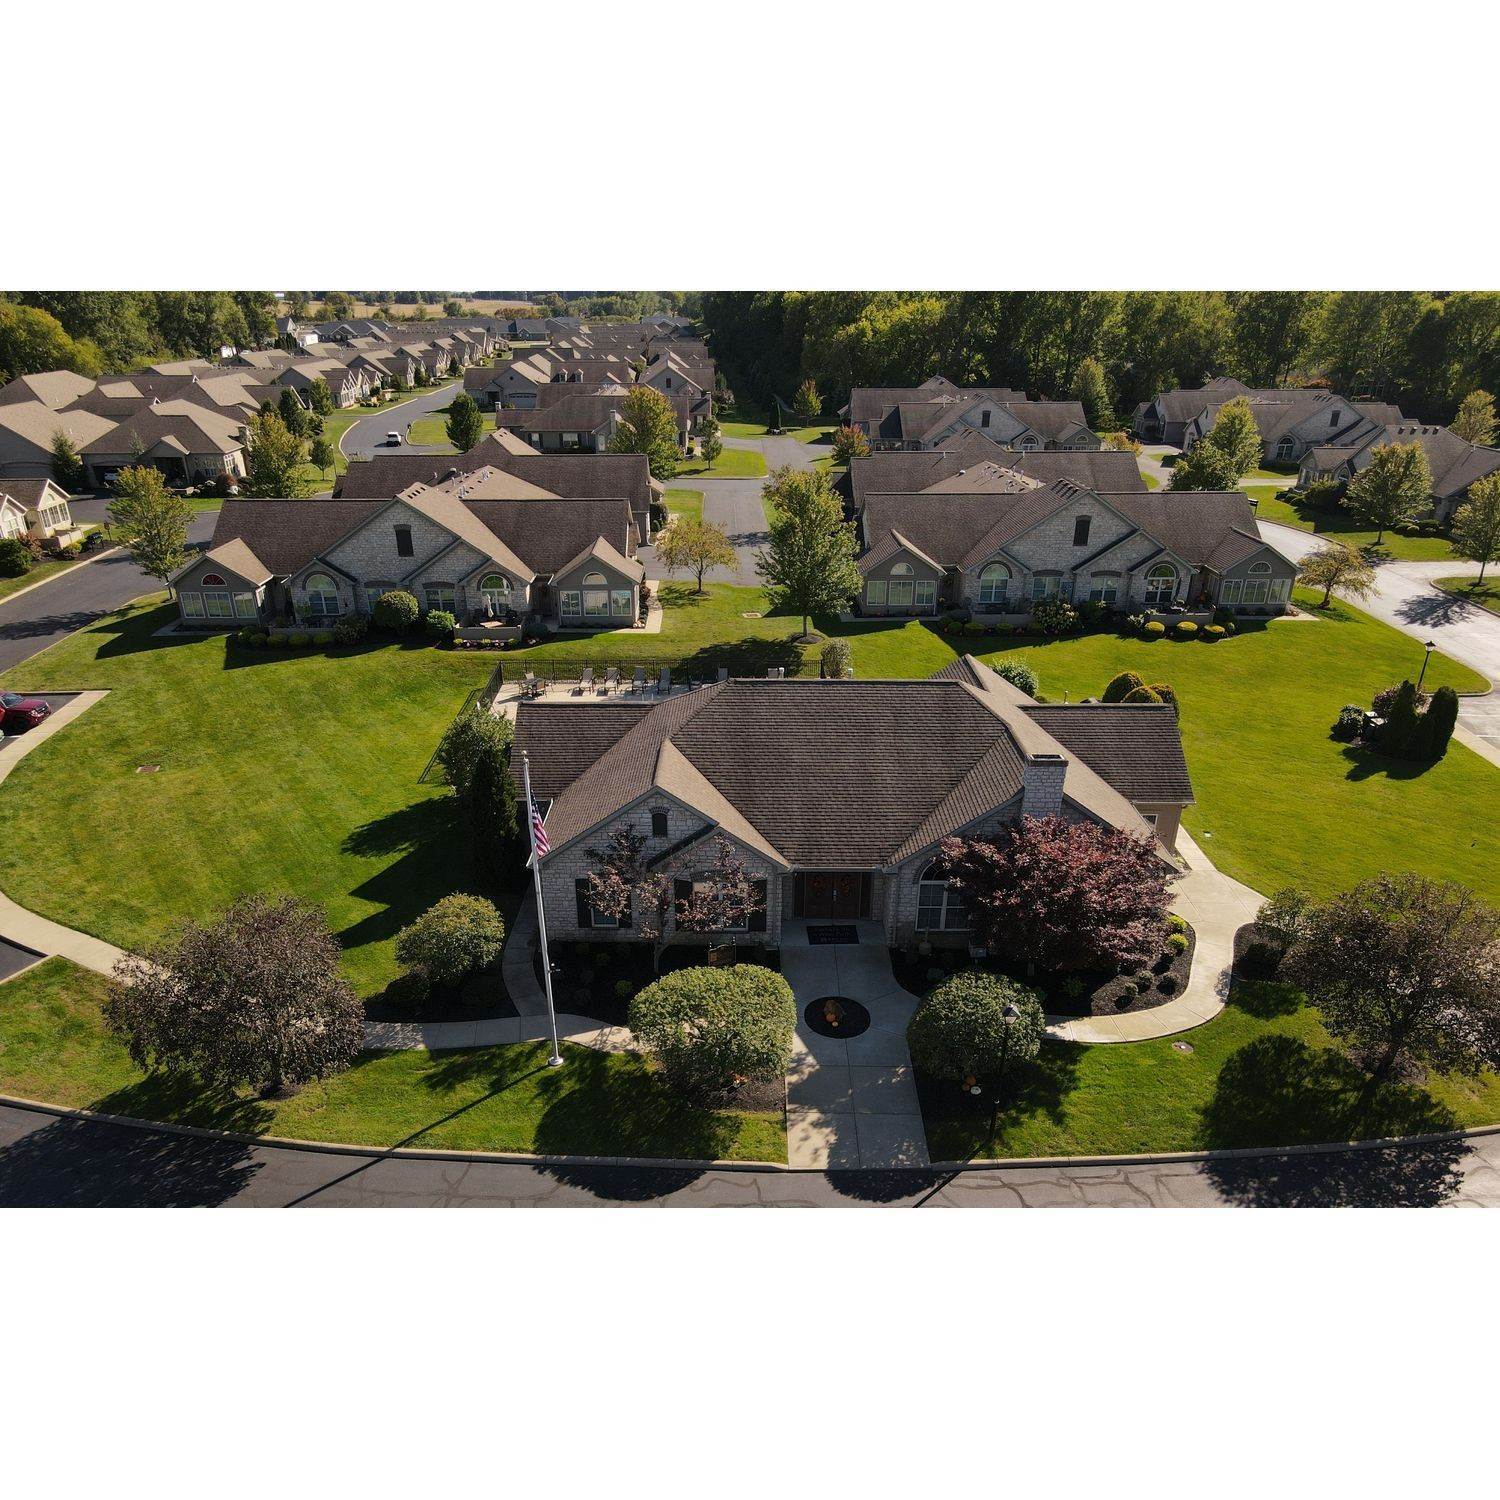 13. 4079 Coventry Circle, Huron, OH 44839에 The Courtyards at Plum Brook 건물